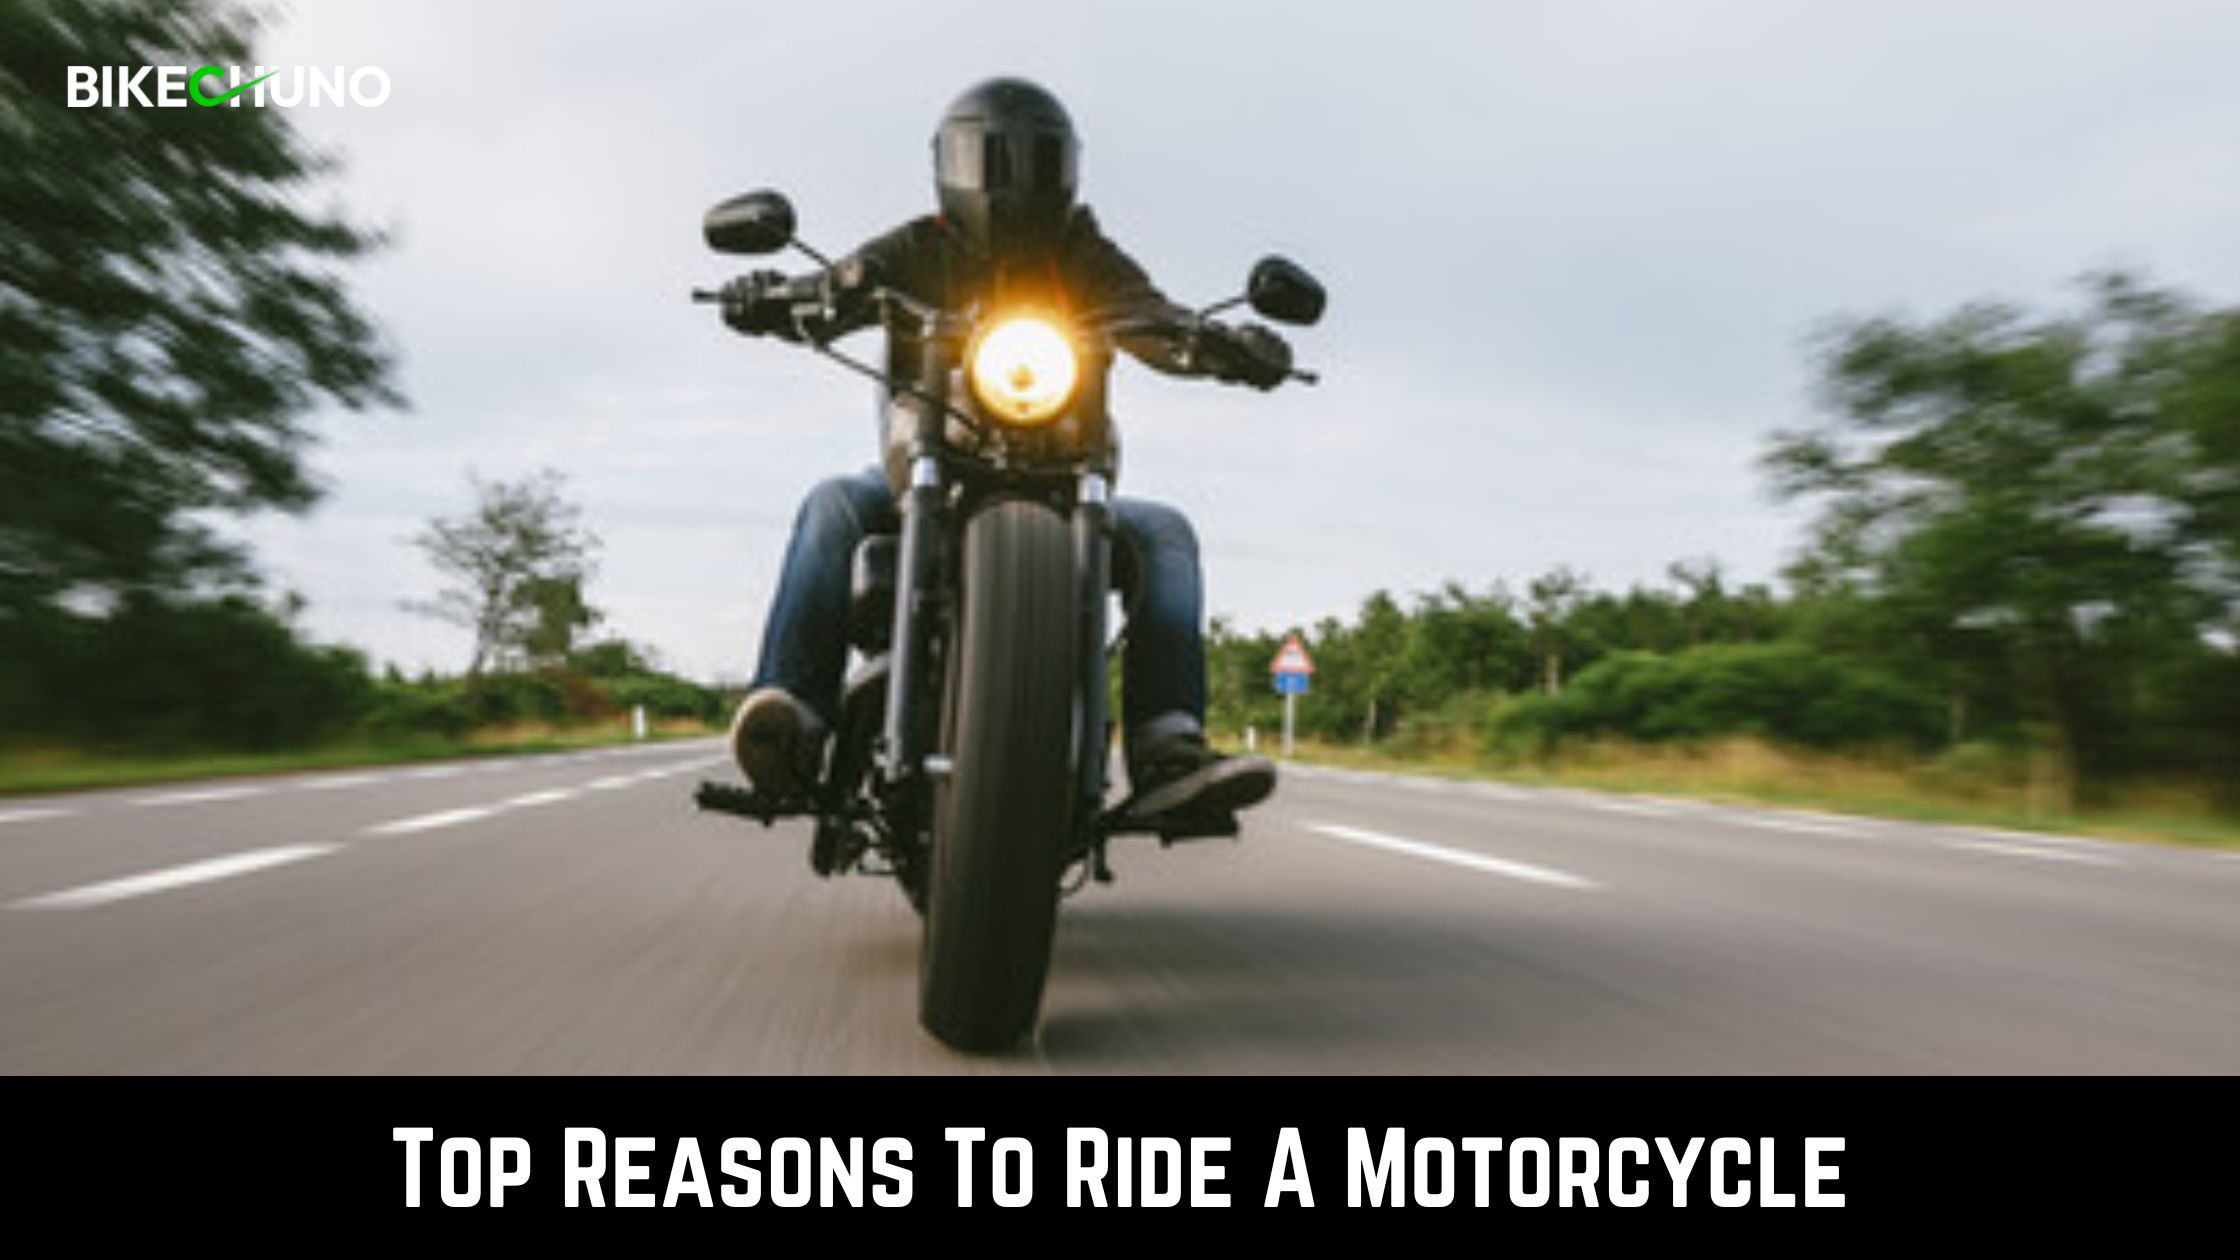 Top 10 reasons to ride a motorcycle